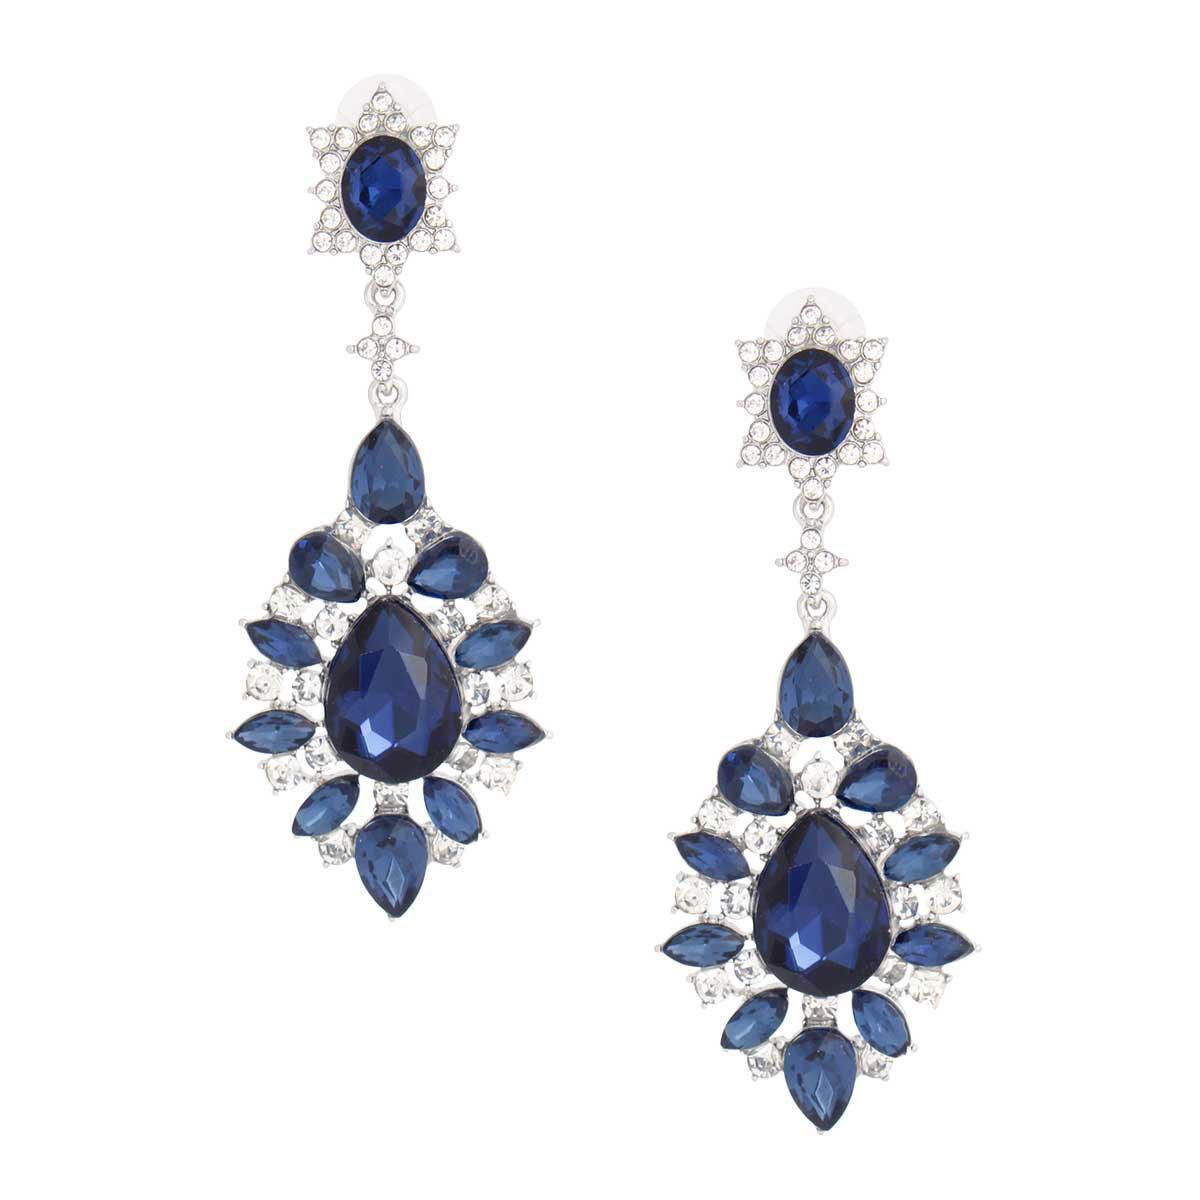 Teardrop Navy Earrings: Add Elegance & Style to Your Jewelry Collection